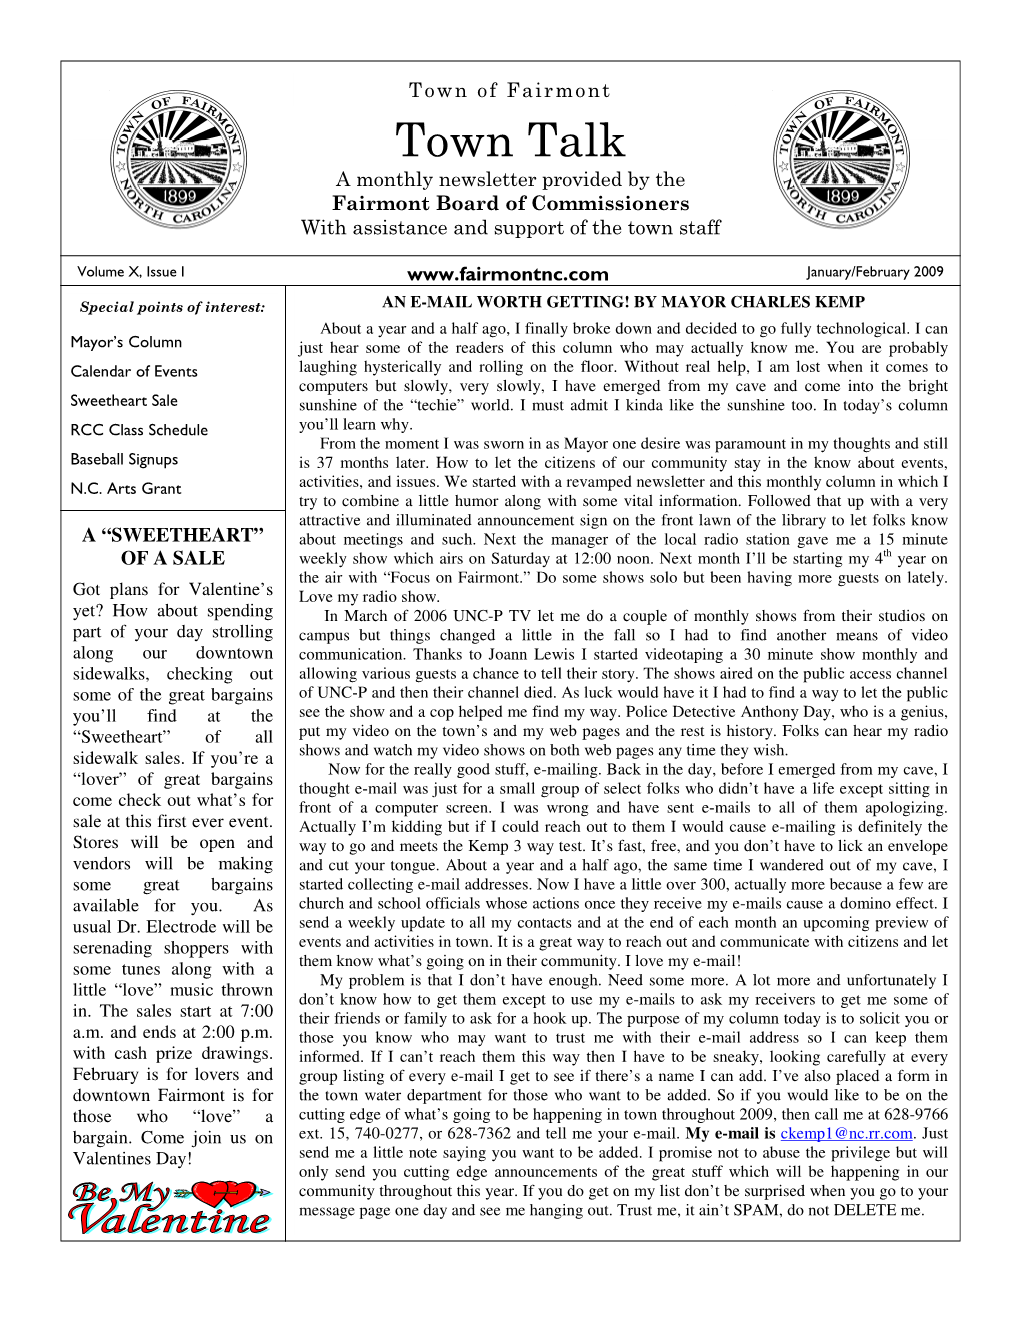 Town Talk a Monthly Newsletter Provided by the Fairmont Board of Commissioners with Assistance and Support of the Town Staff